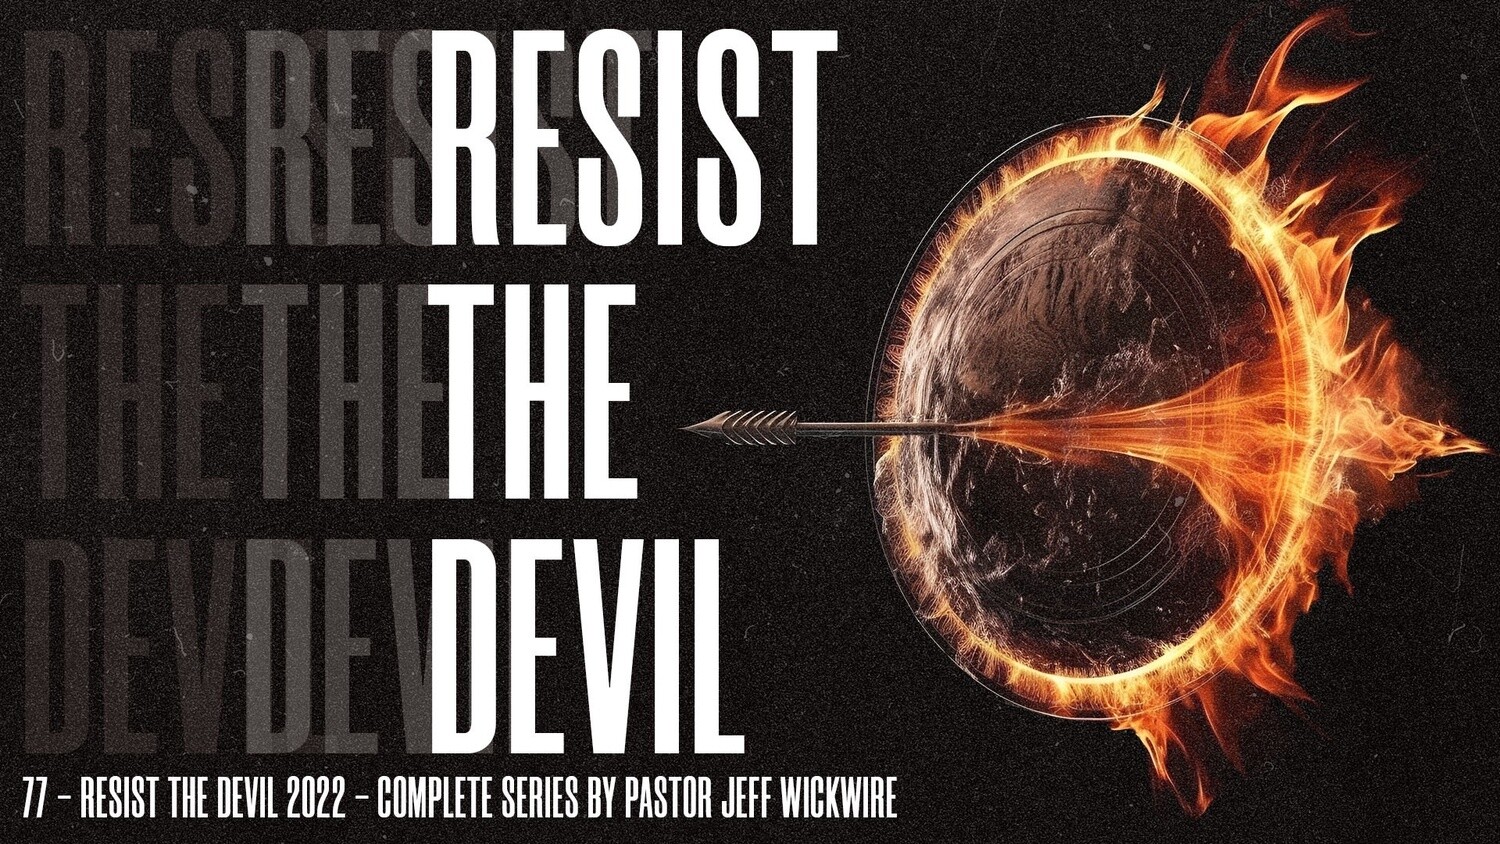 77 - Resist The Devil 2022 - Complete Series By Pastor Jeff Wickwire